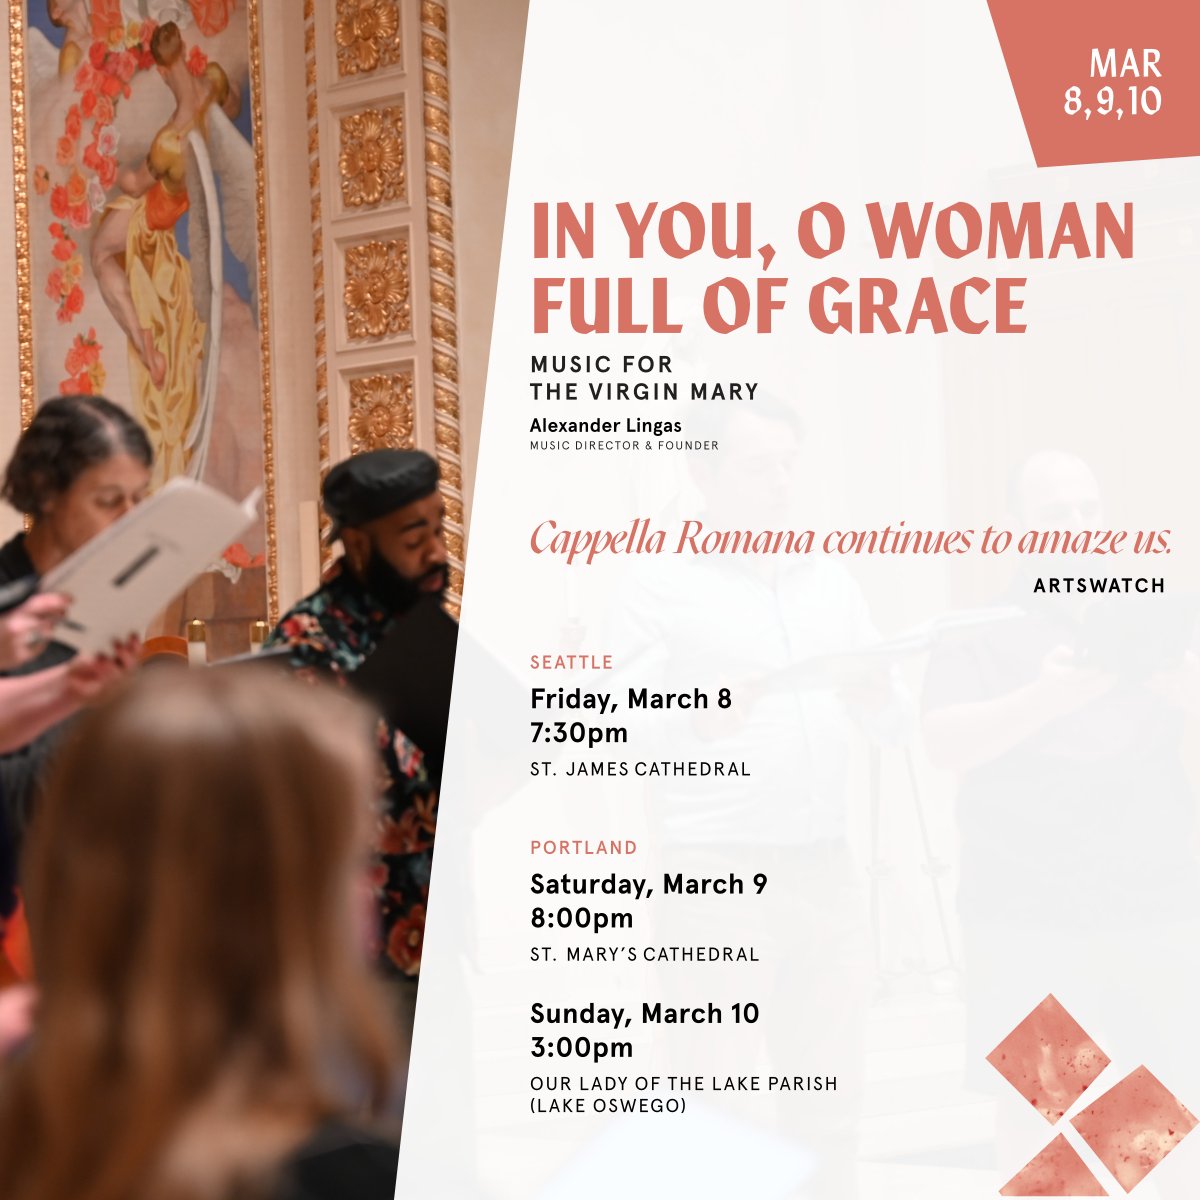 From the earliest days of the Christian tradition, composers have venerated the Virgin Mary, telling the story of her life and the cosmic significance of her role. Hear these settings tonight in #Seattle, Saturday in #Portland, and Sunday in #LakeOswego. cappellaromana.org/inyou